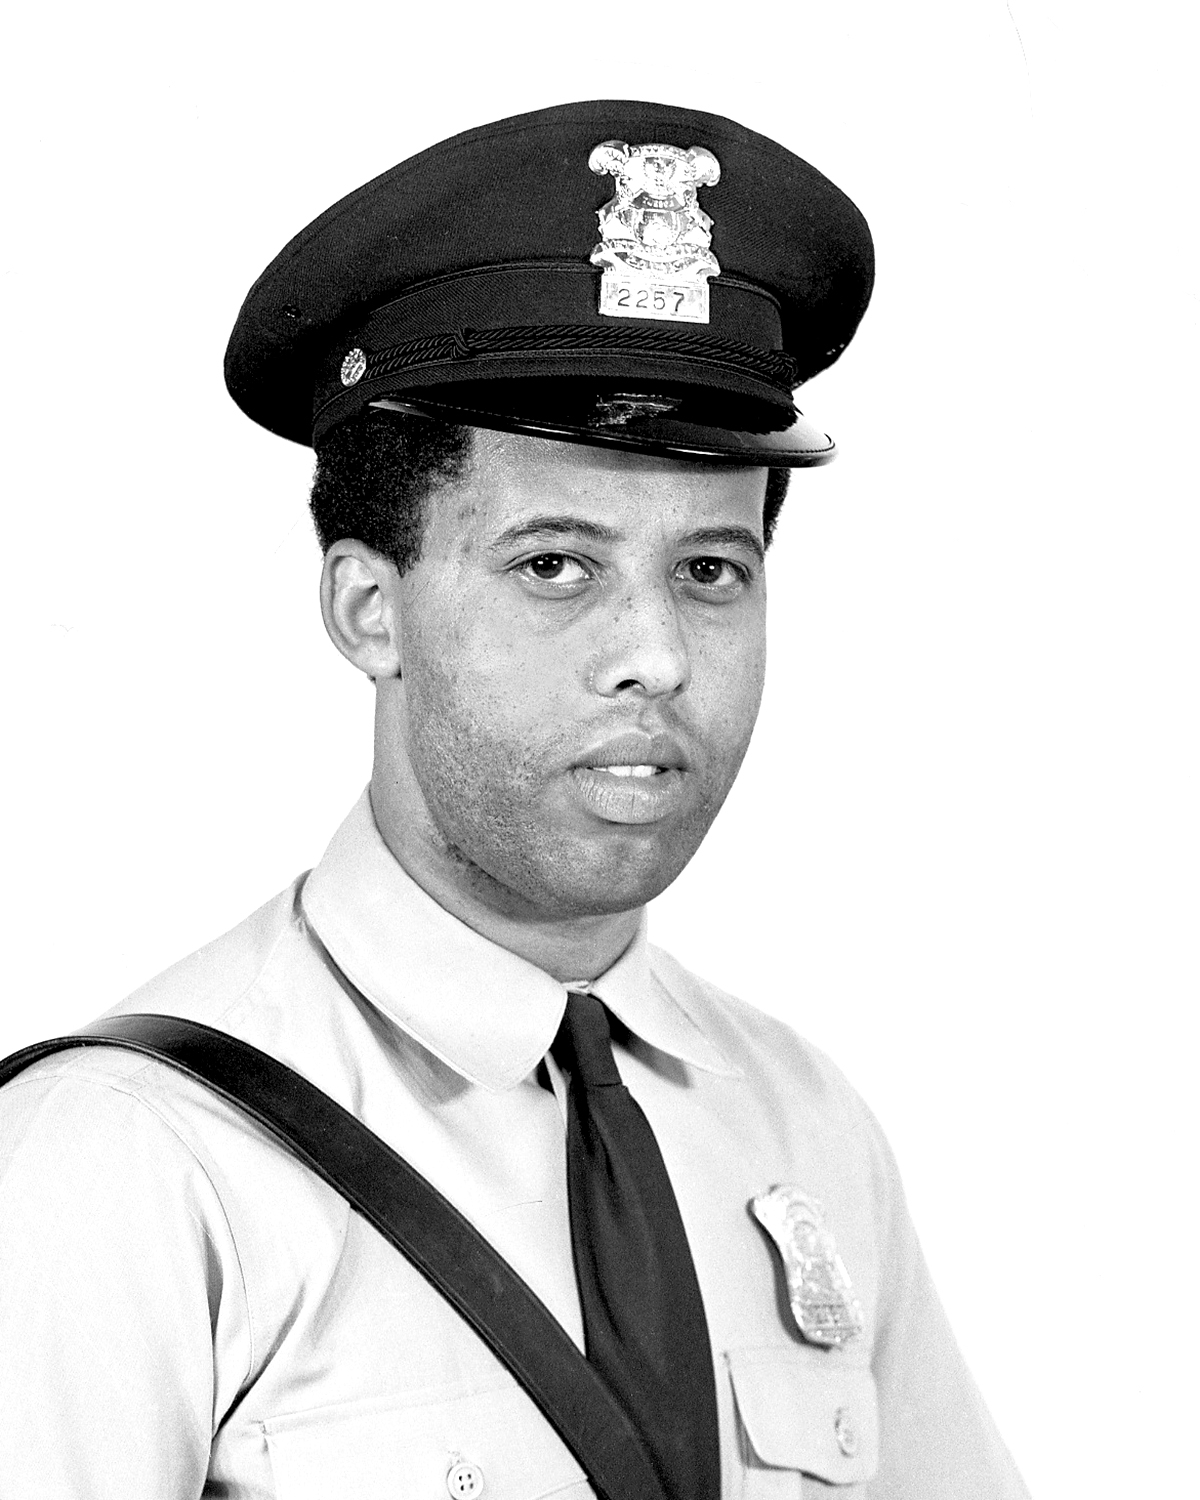 Police Officer Donald Olson Kimbrough, Detroit Police